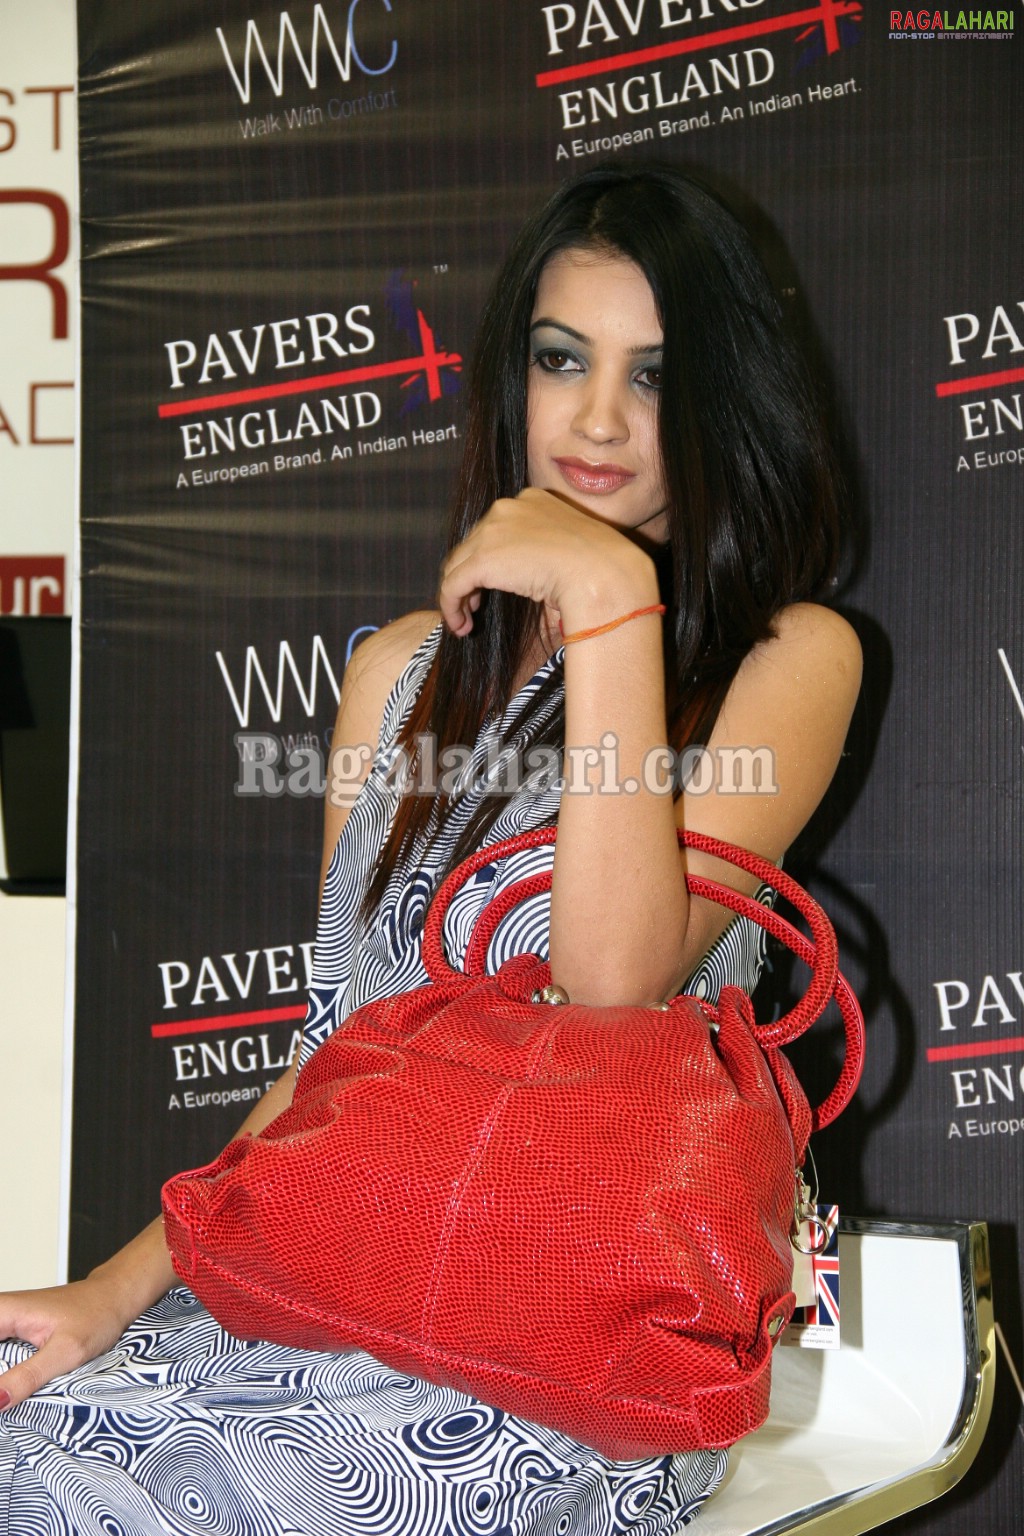 Pavers England Autumn Winter 2010 Collection Launch